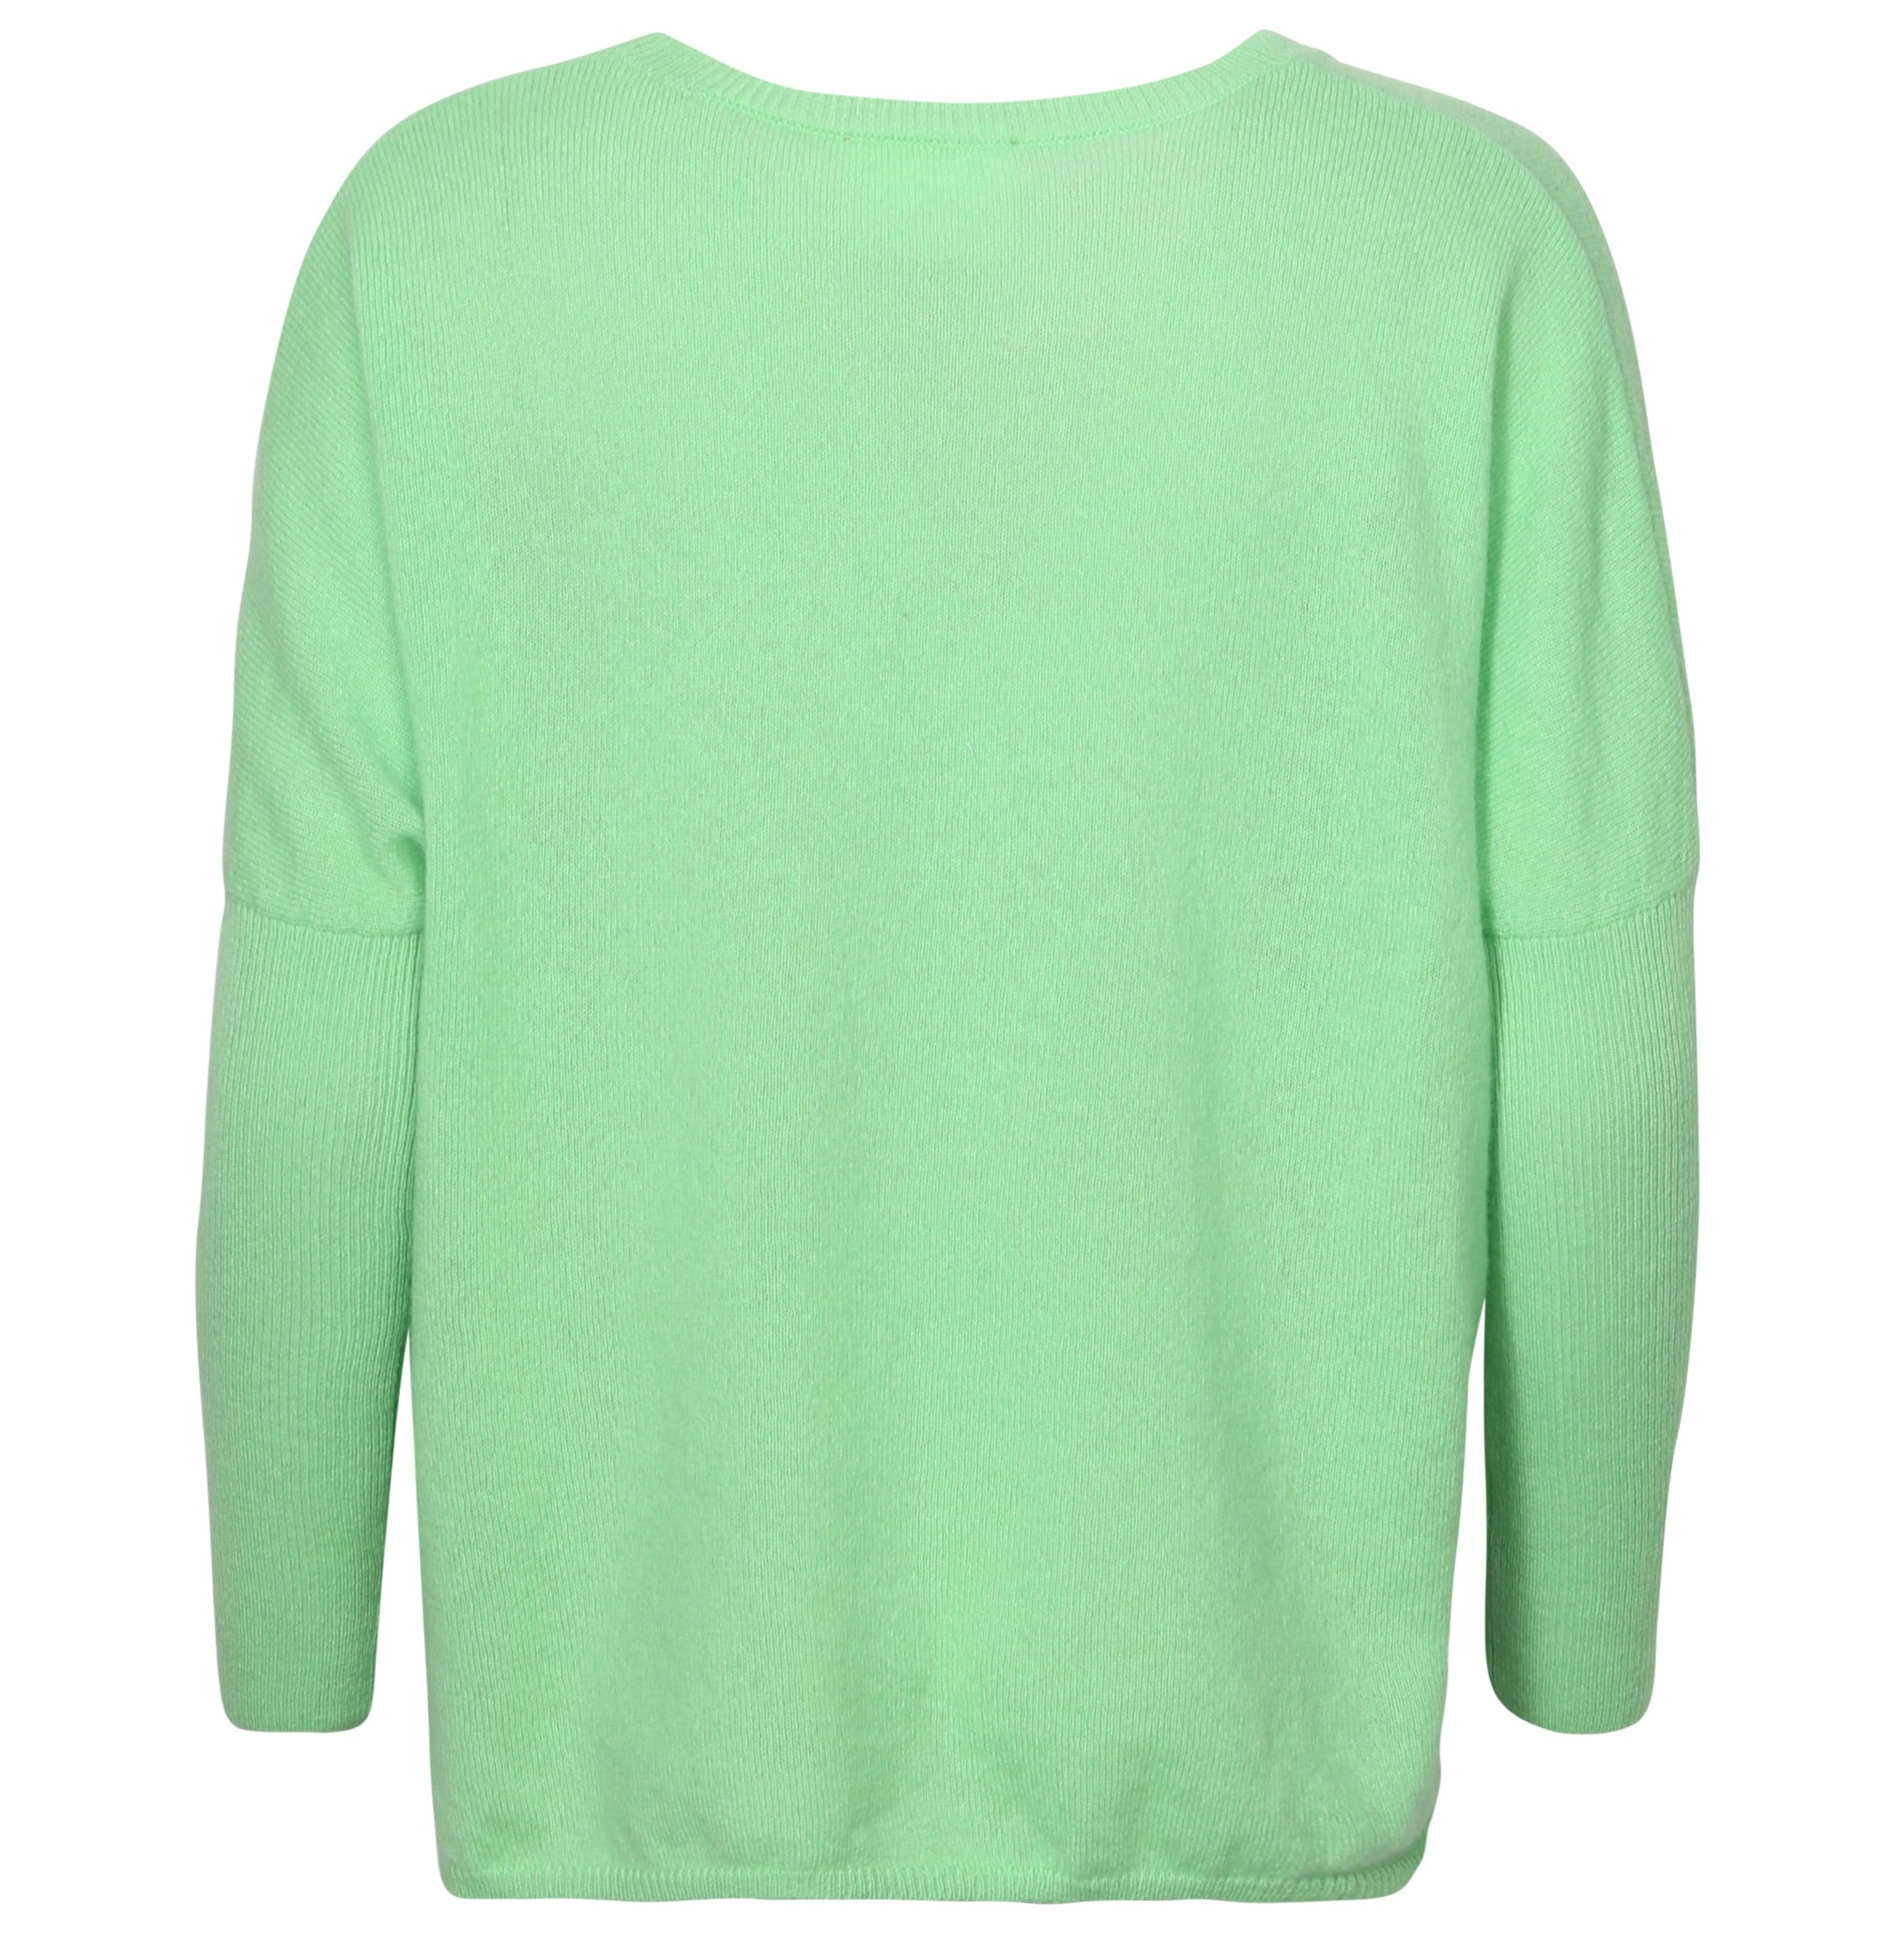 ABSOLUT CASHMERE Poncho Sweater Astrid in Light Green M